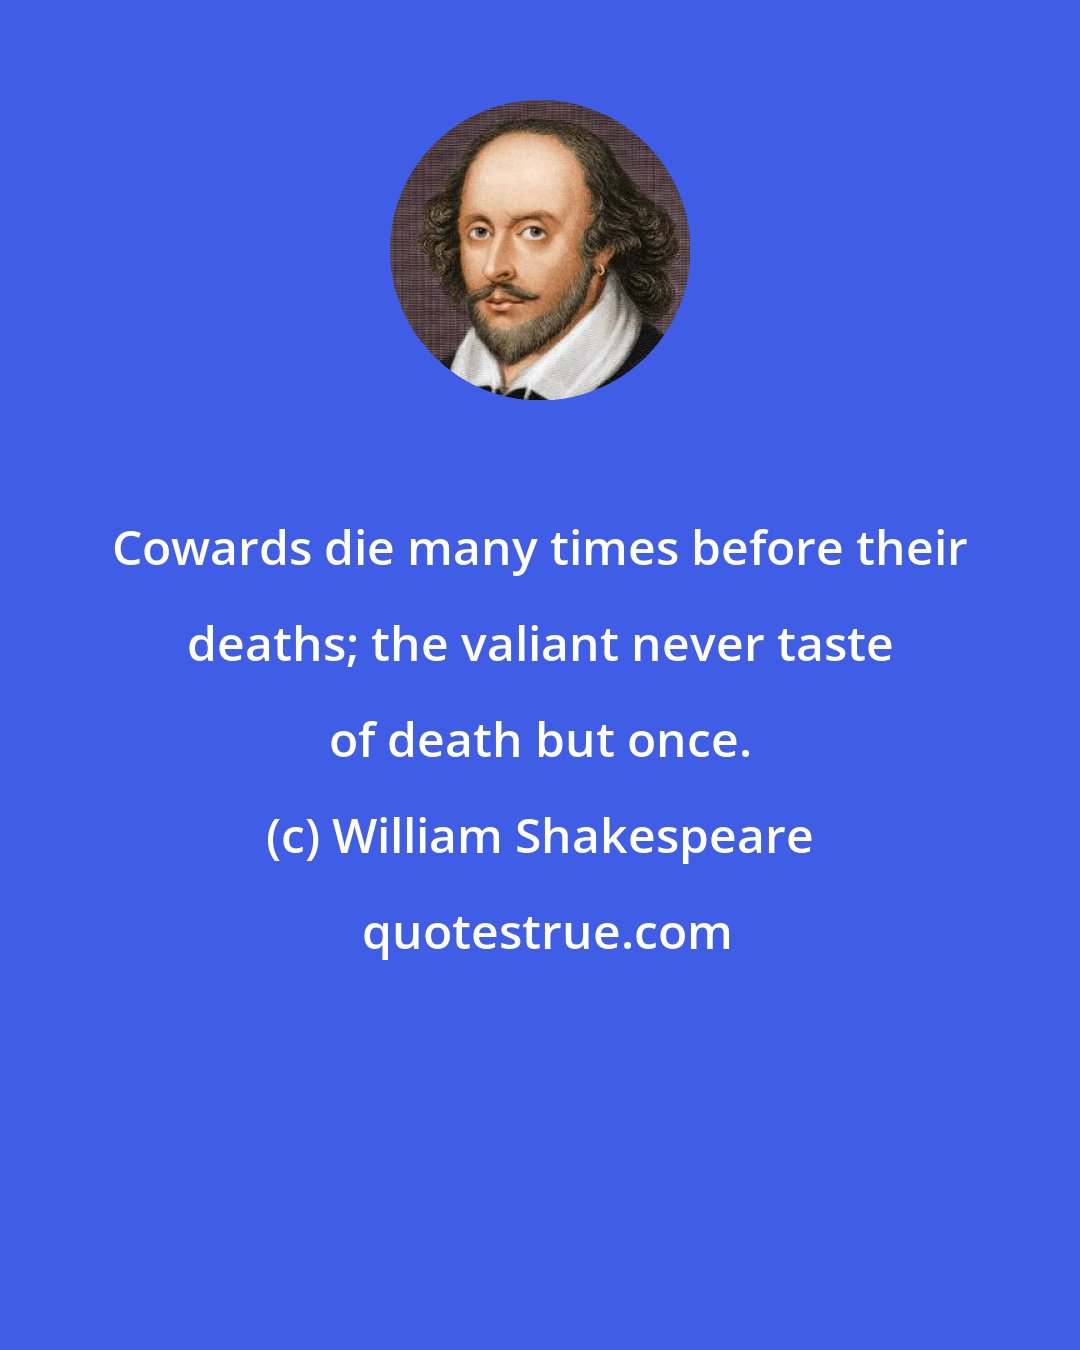 William Shakespeare: Cowards die many times before their deaths; the valiant never taste of death but once.